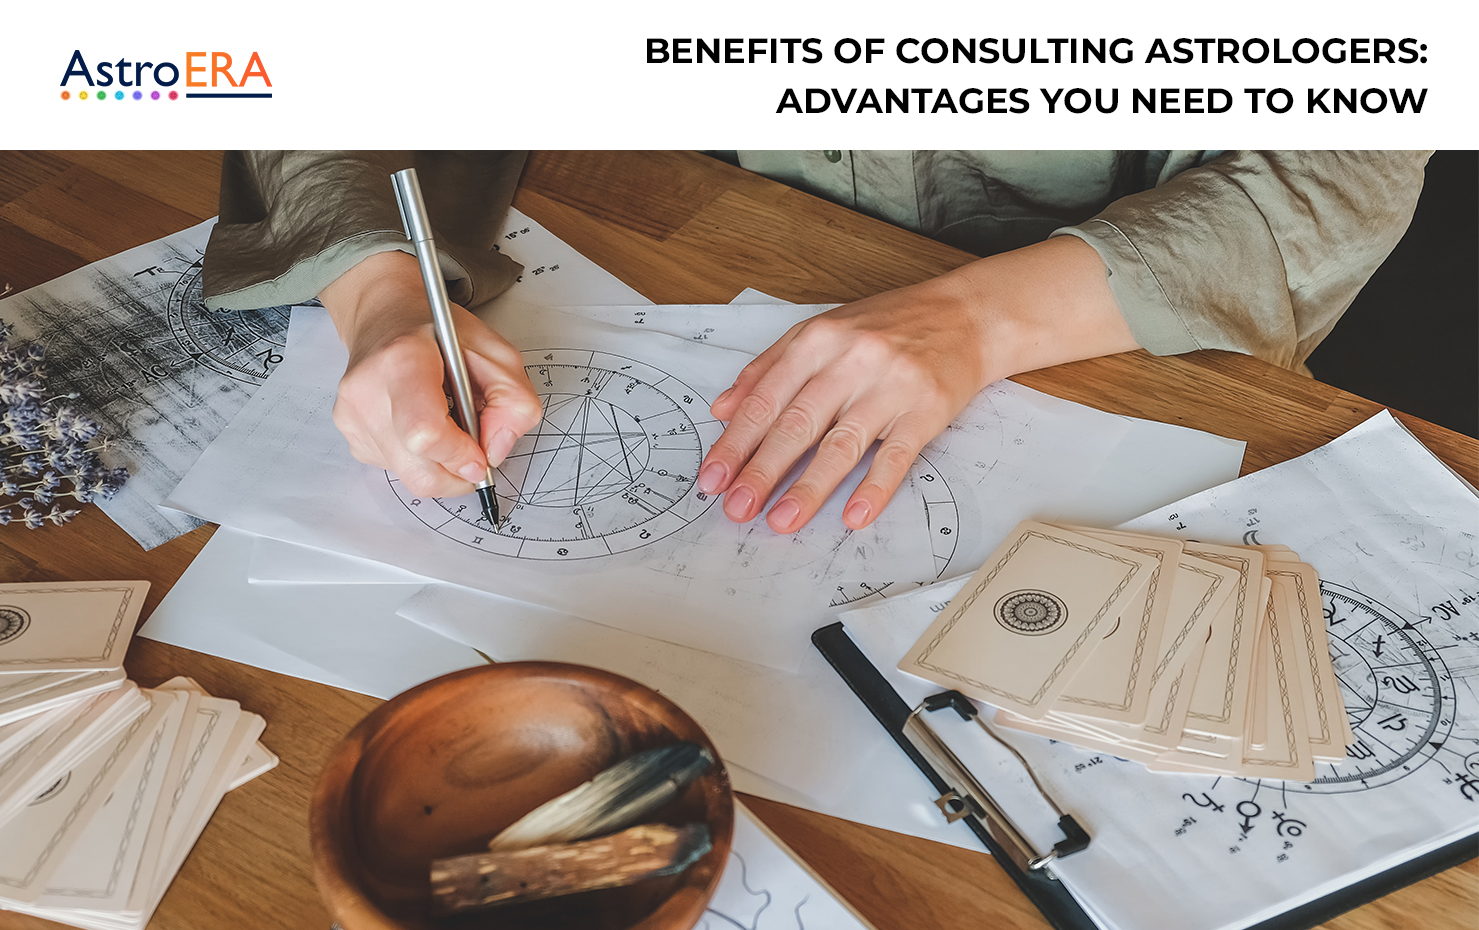 Benefits of Consulting Astrologers: Advantages You Need to Know